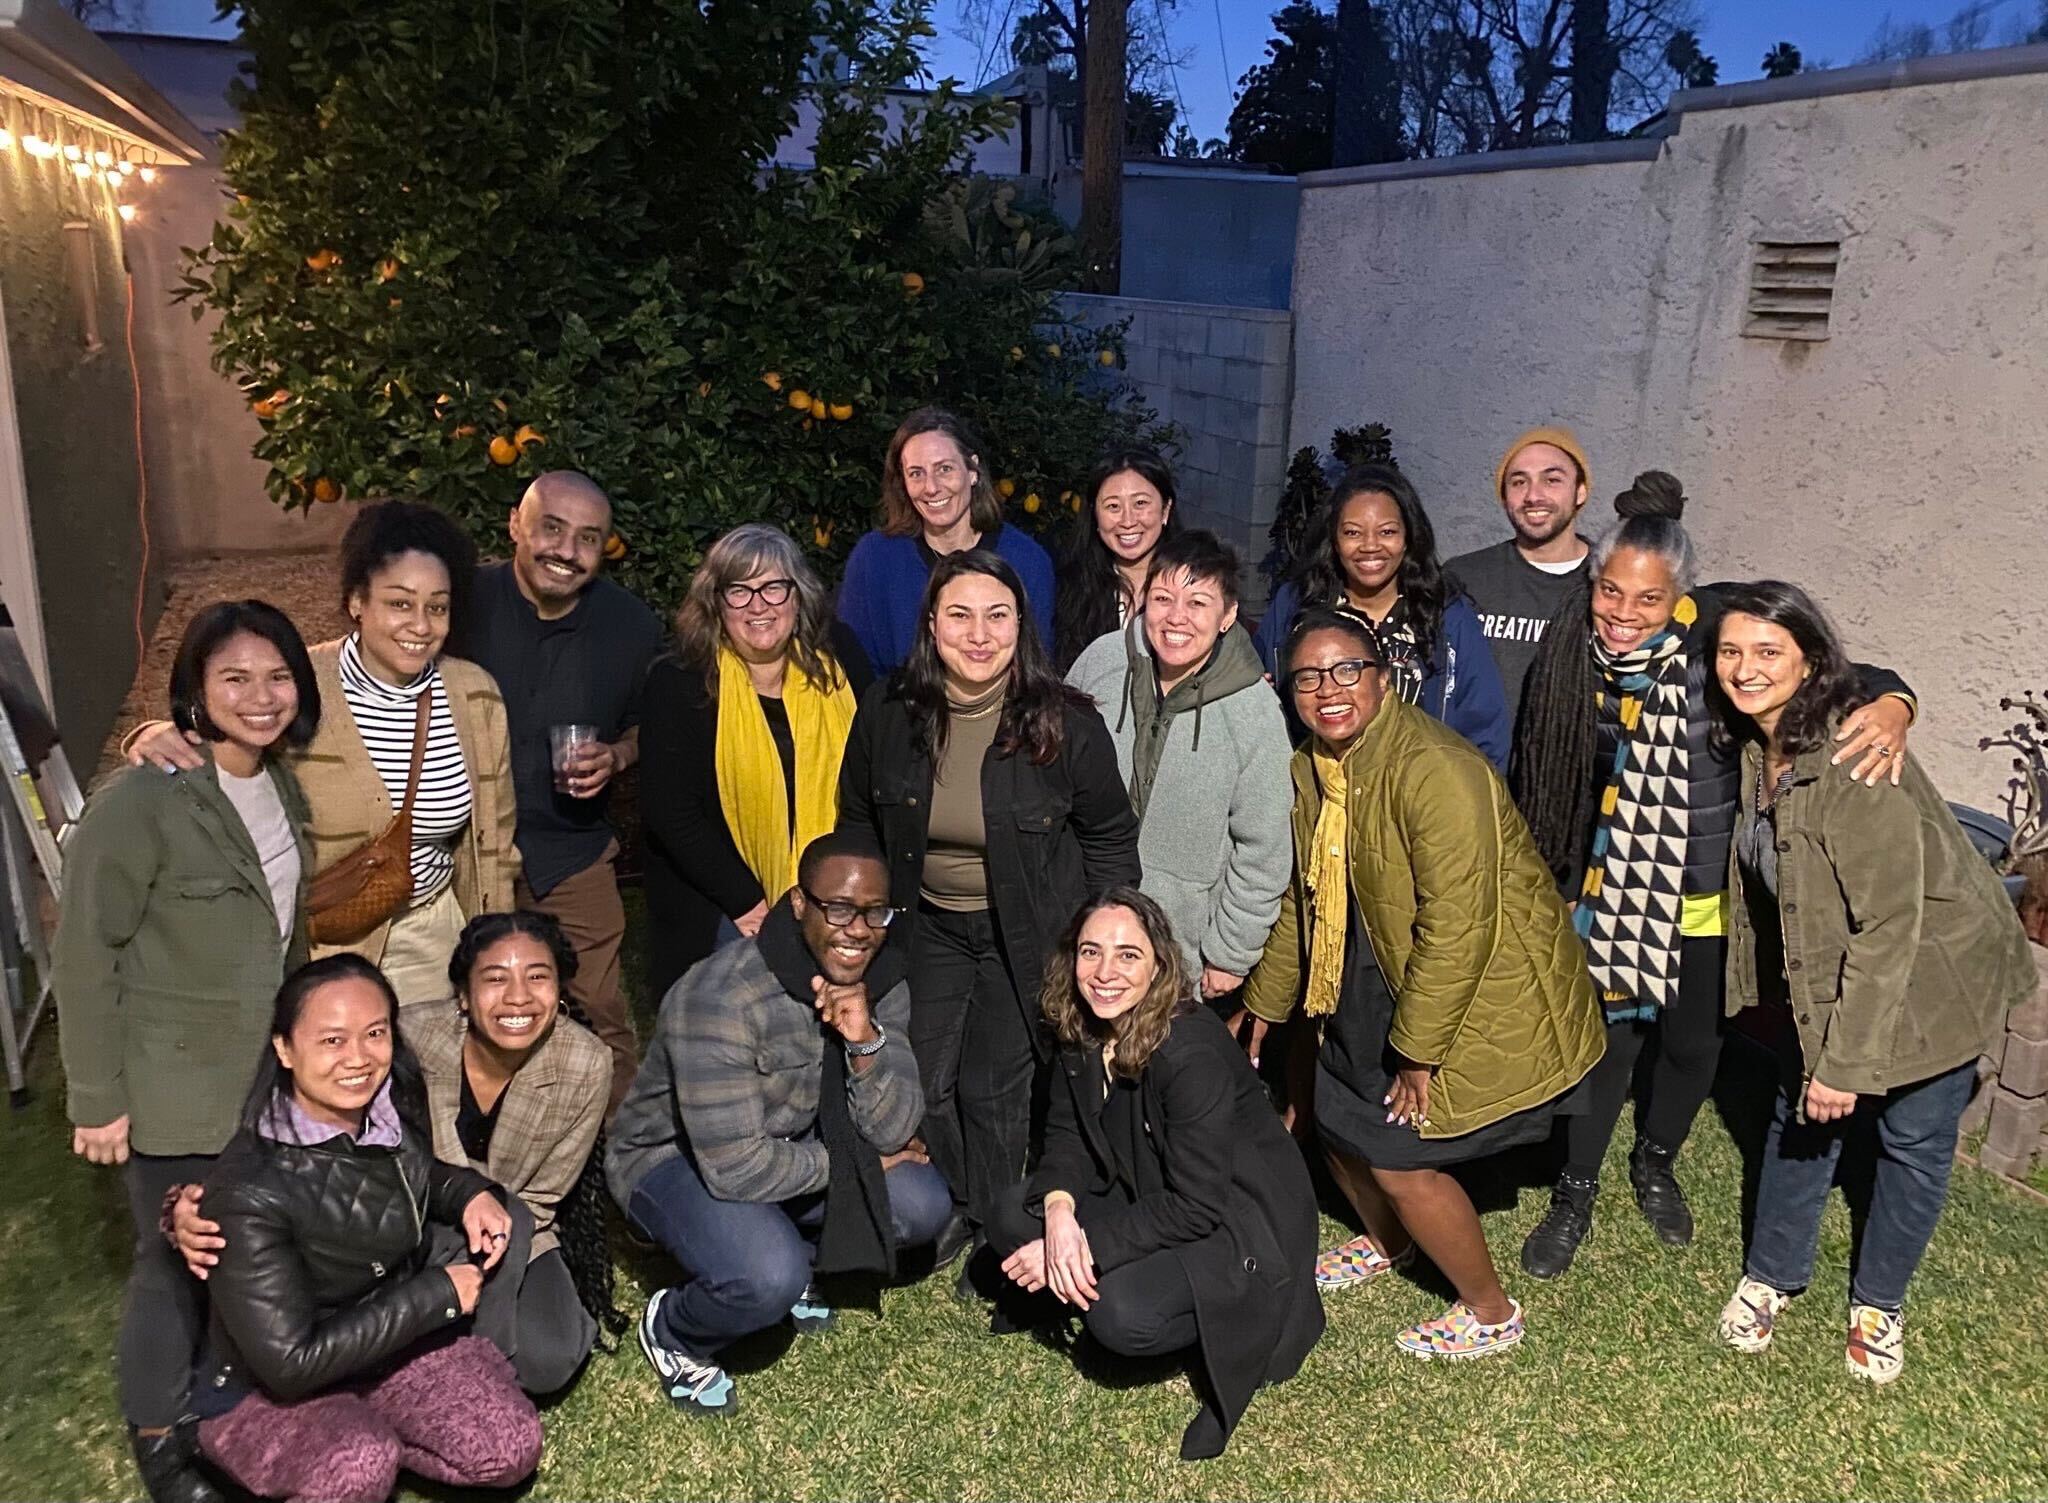 Photo of NFG staff and board in a backyard at dusk.